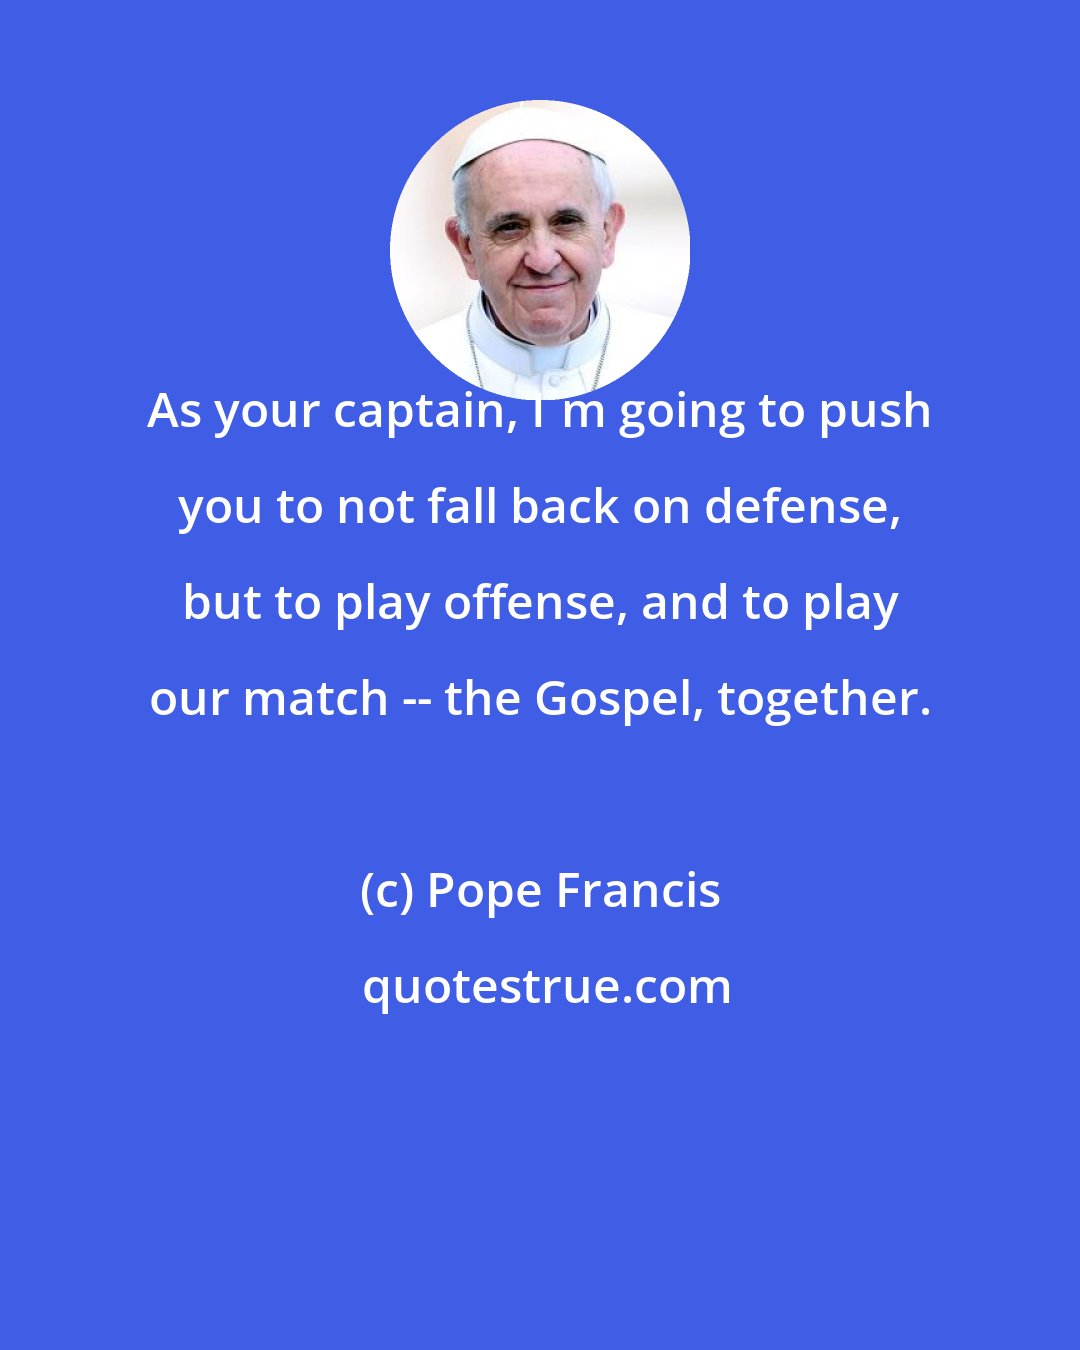 Pope Francis: As your captain, I'm going to push you to not fall back on defense, but to play offense, and to play our match -- the Gospel, together.